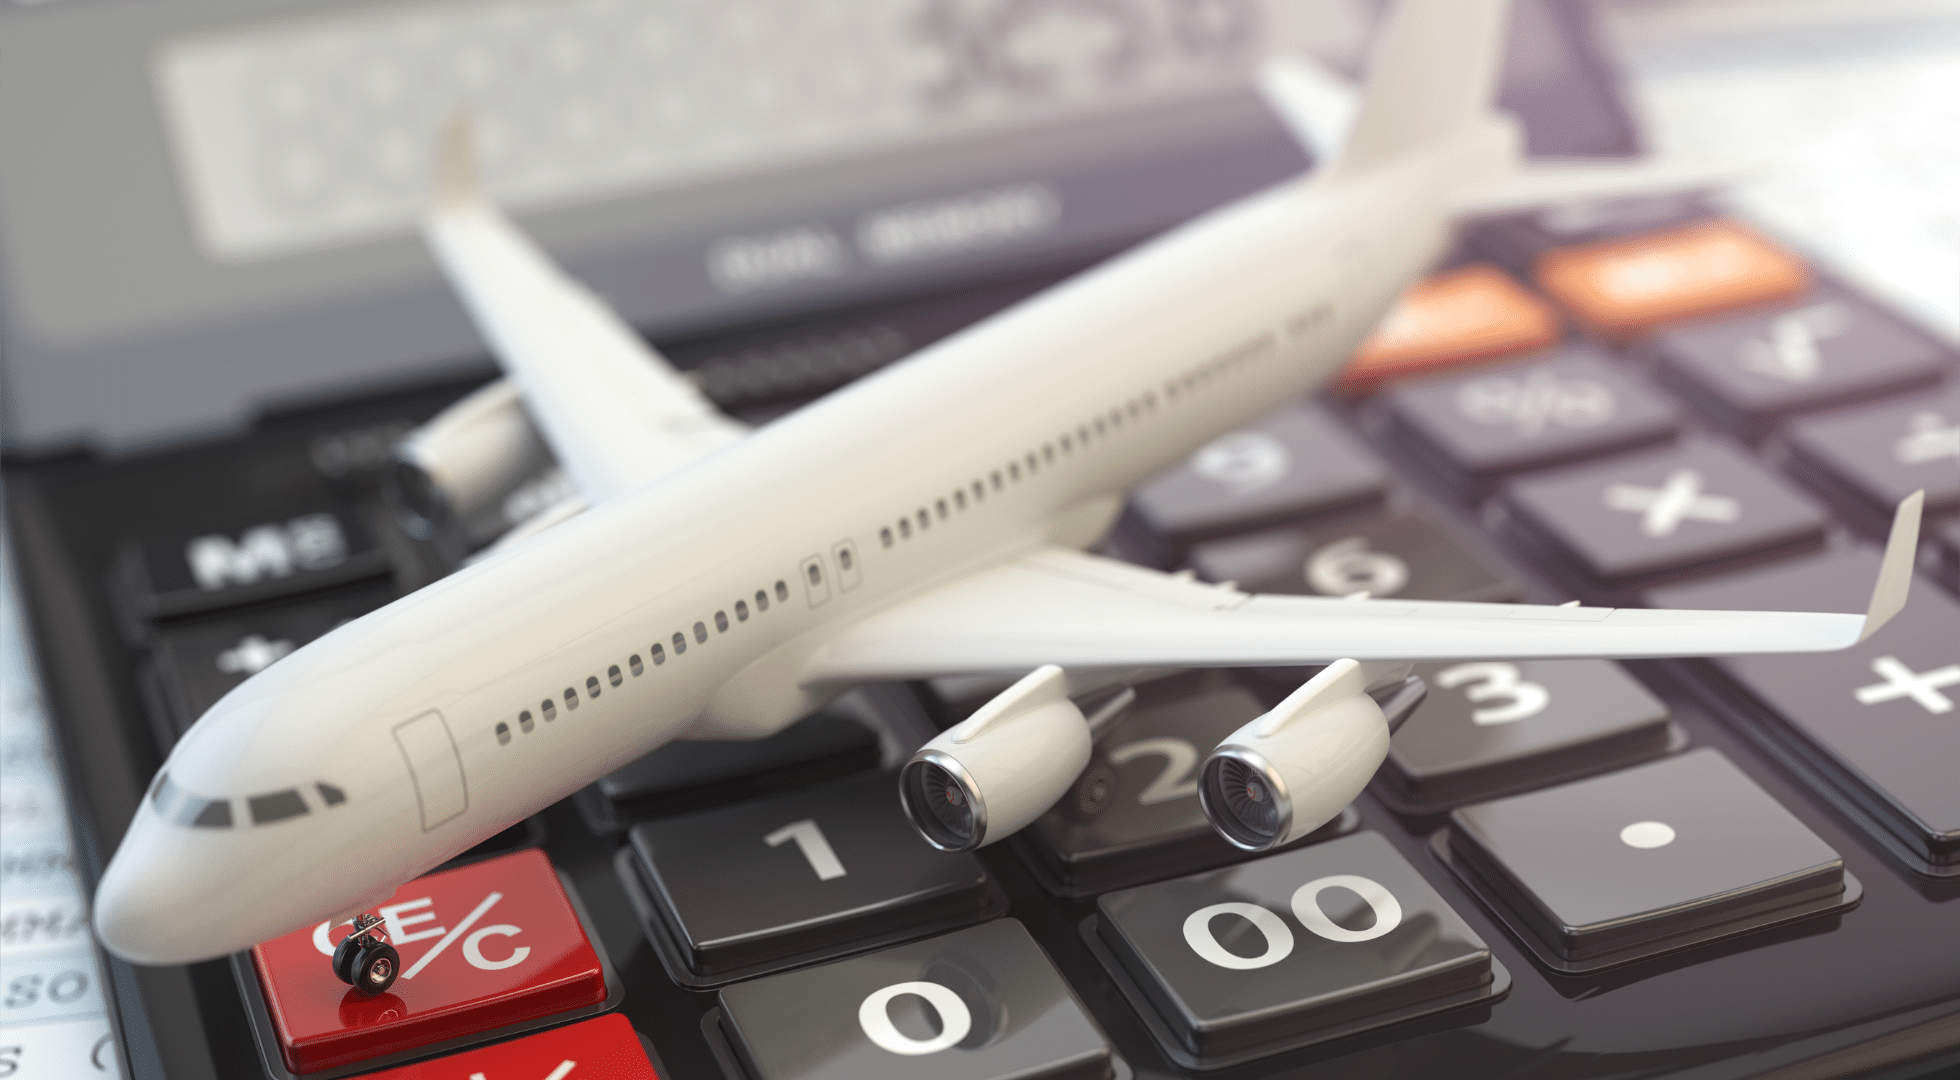 Save on flights, hotels and more with corporate travel discounts 